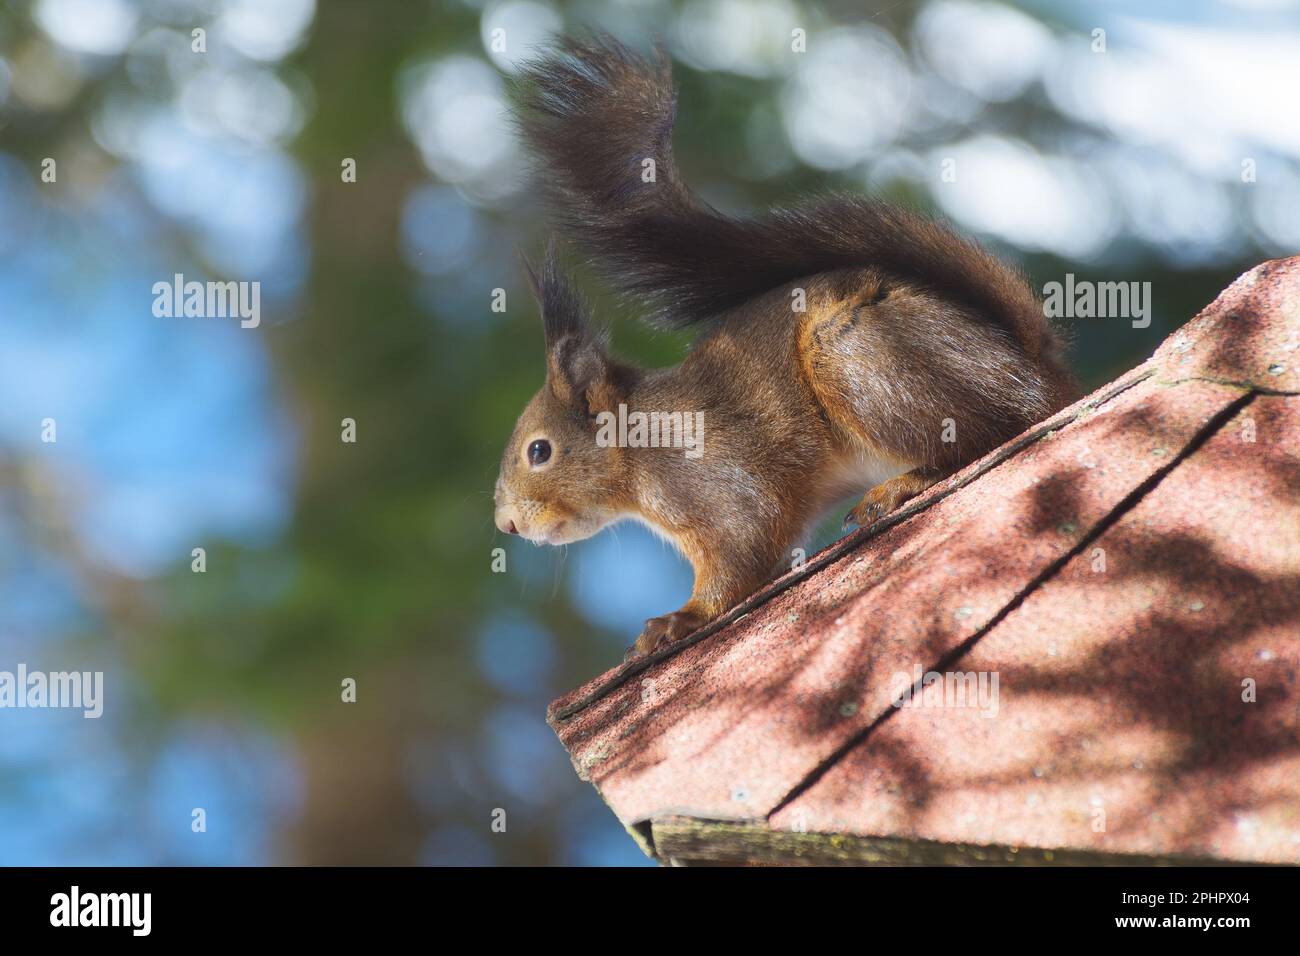 Close-up shot of a cute red squirrel on the roof of a bird feeder near forest. Environment, natural habitat and endangered species concepts Stock Photo